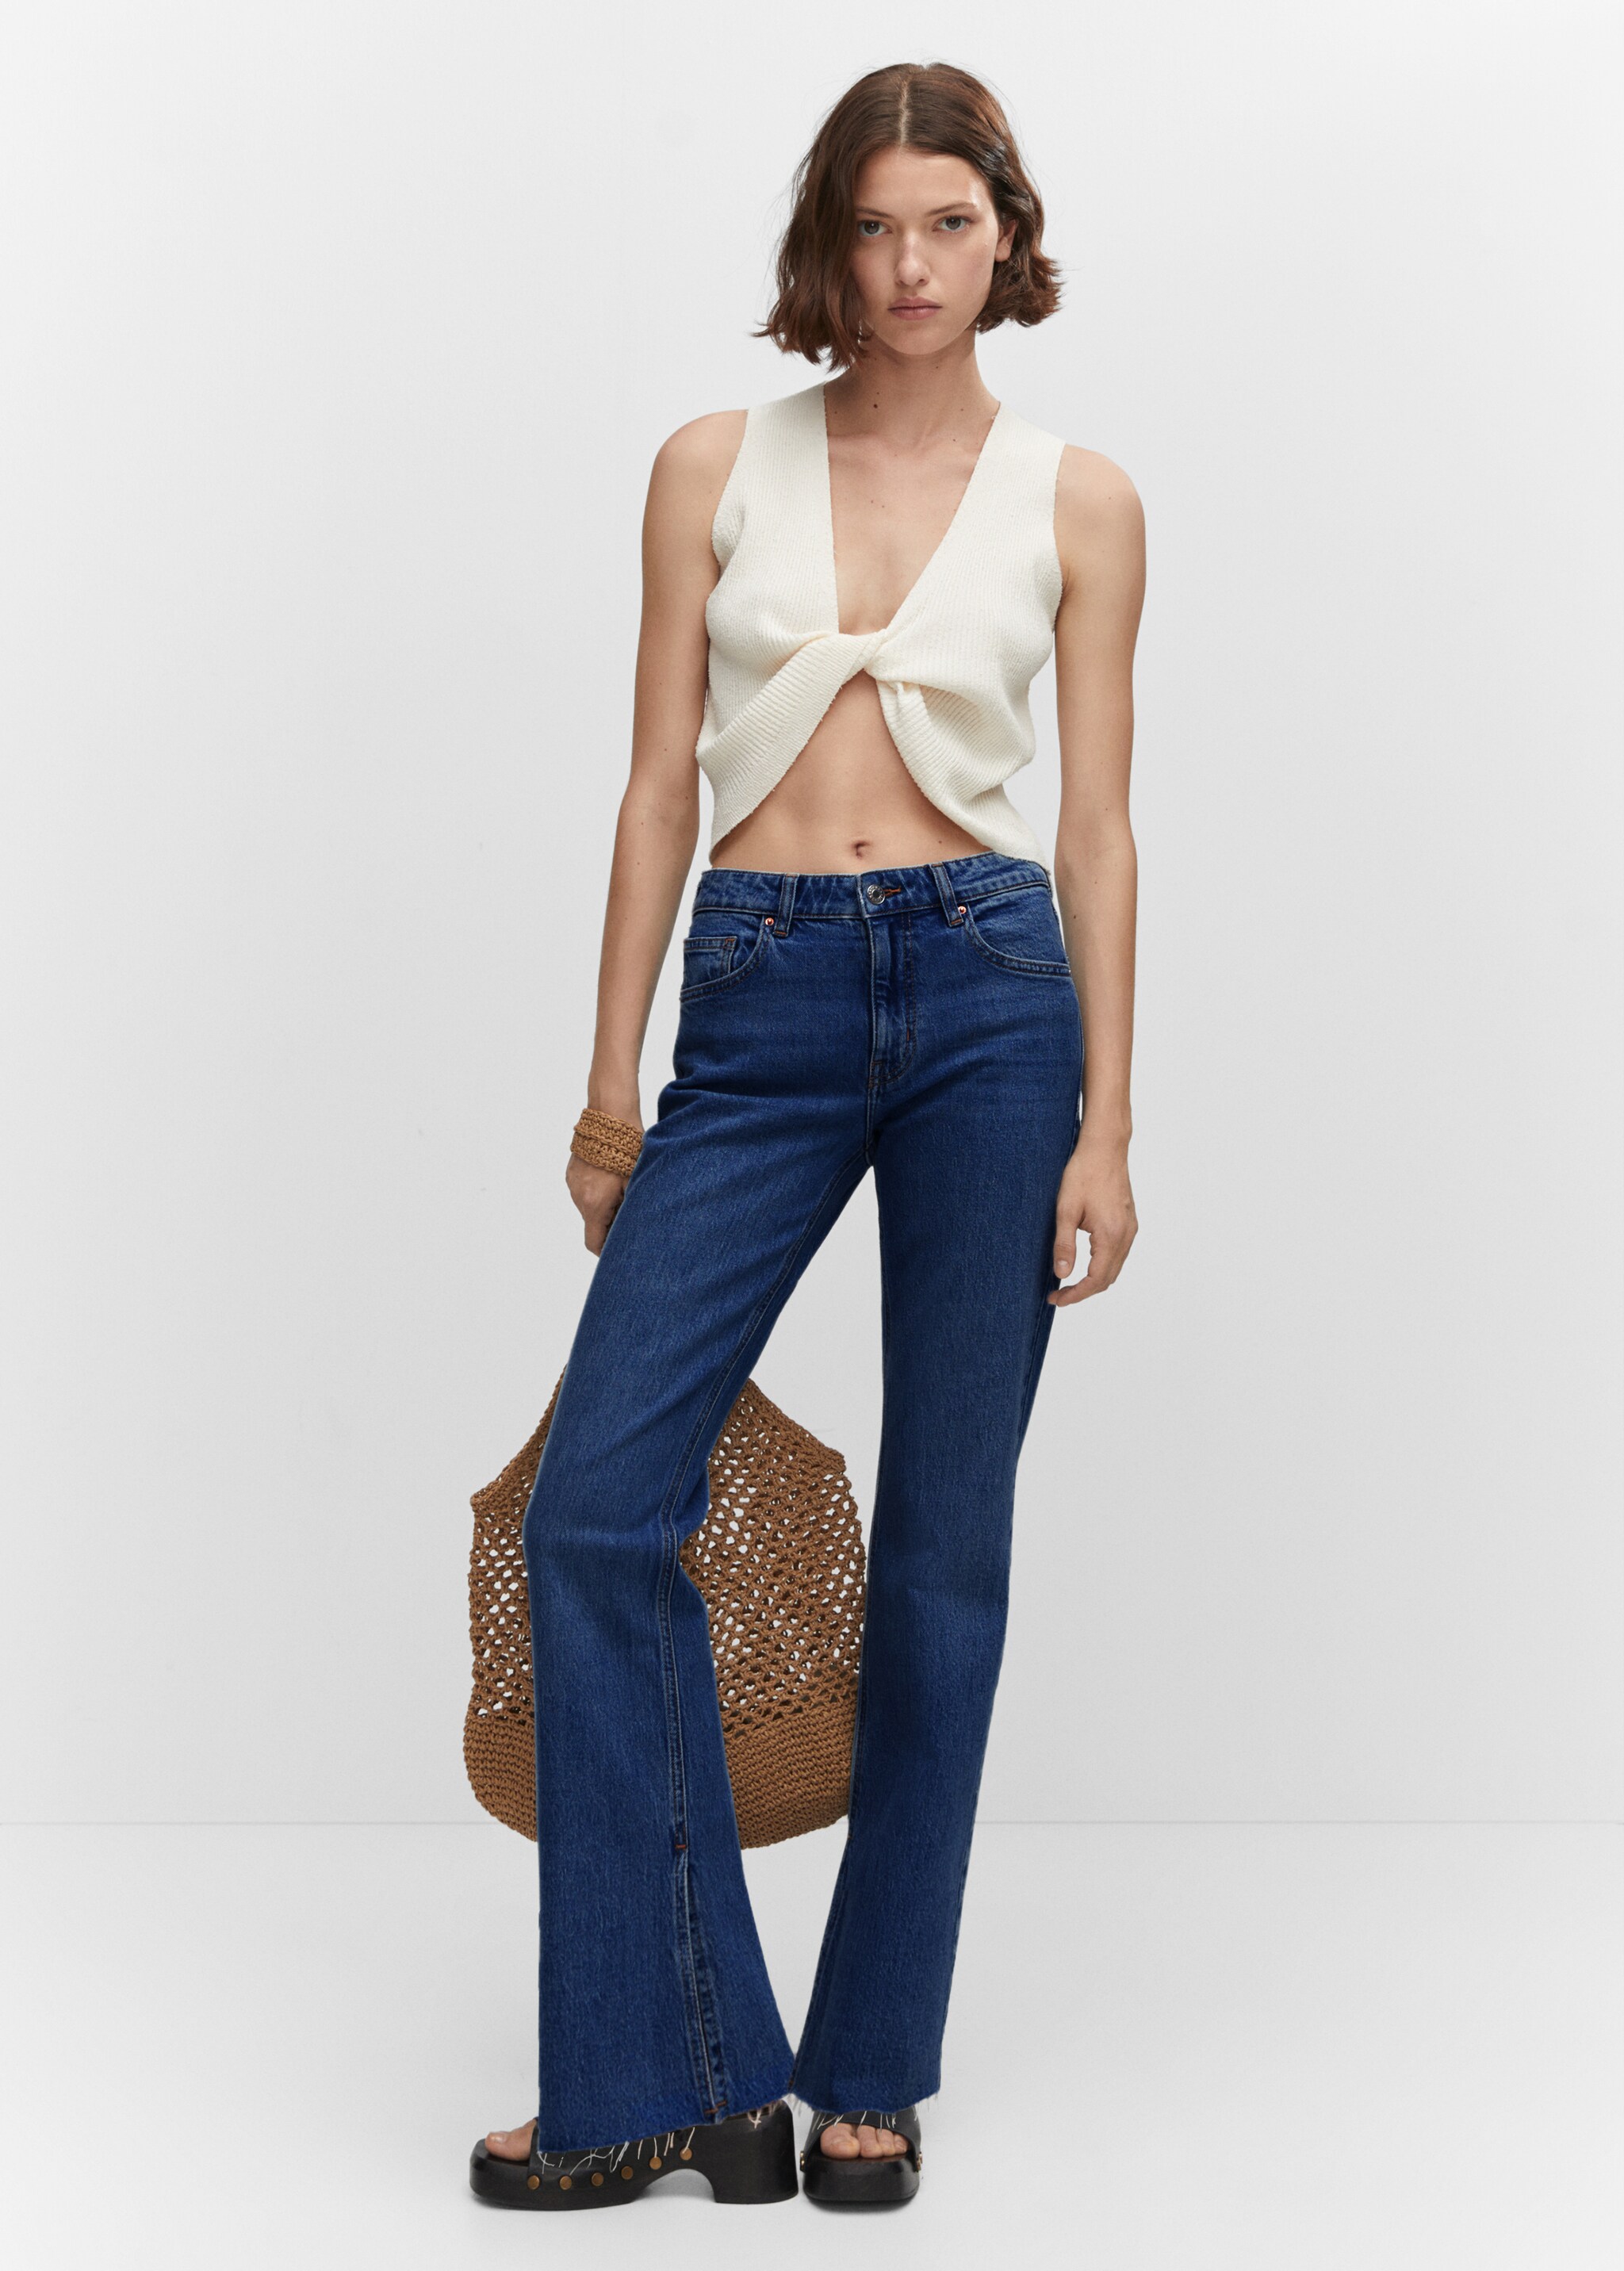 Mid-waist flared jeans with slits - General plane